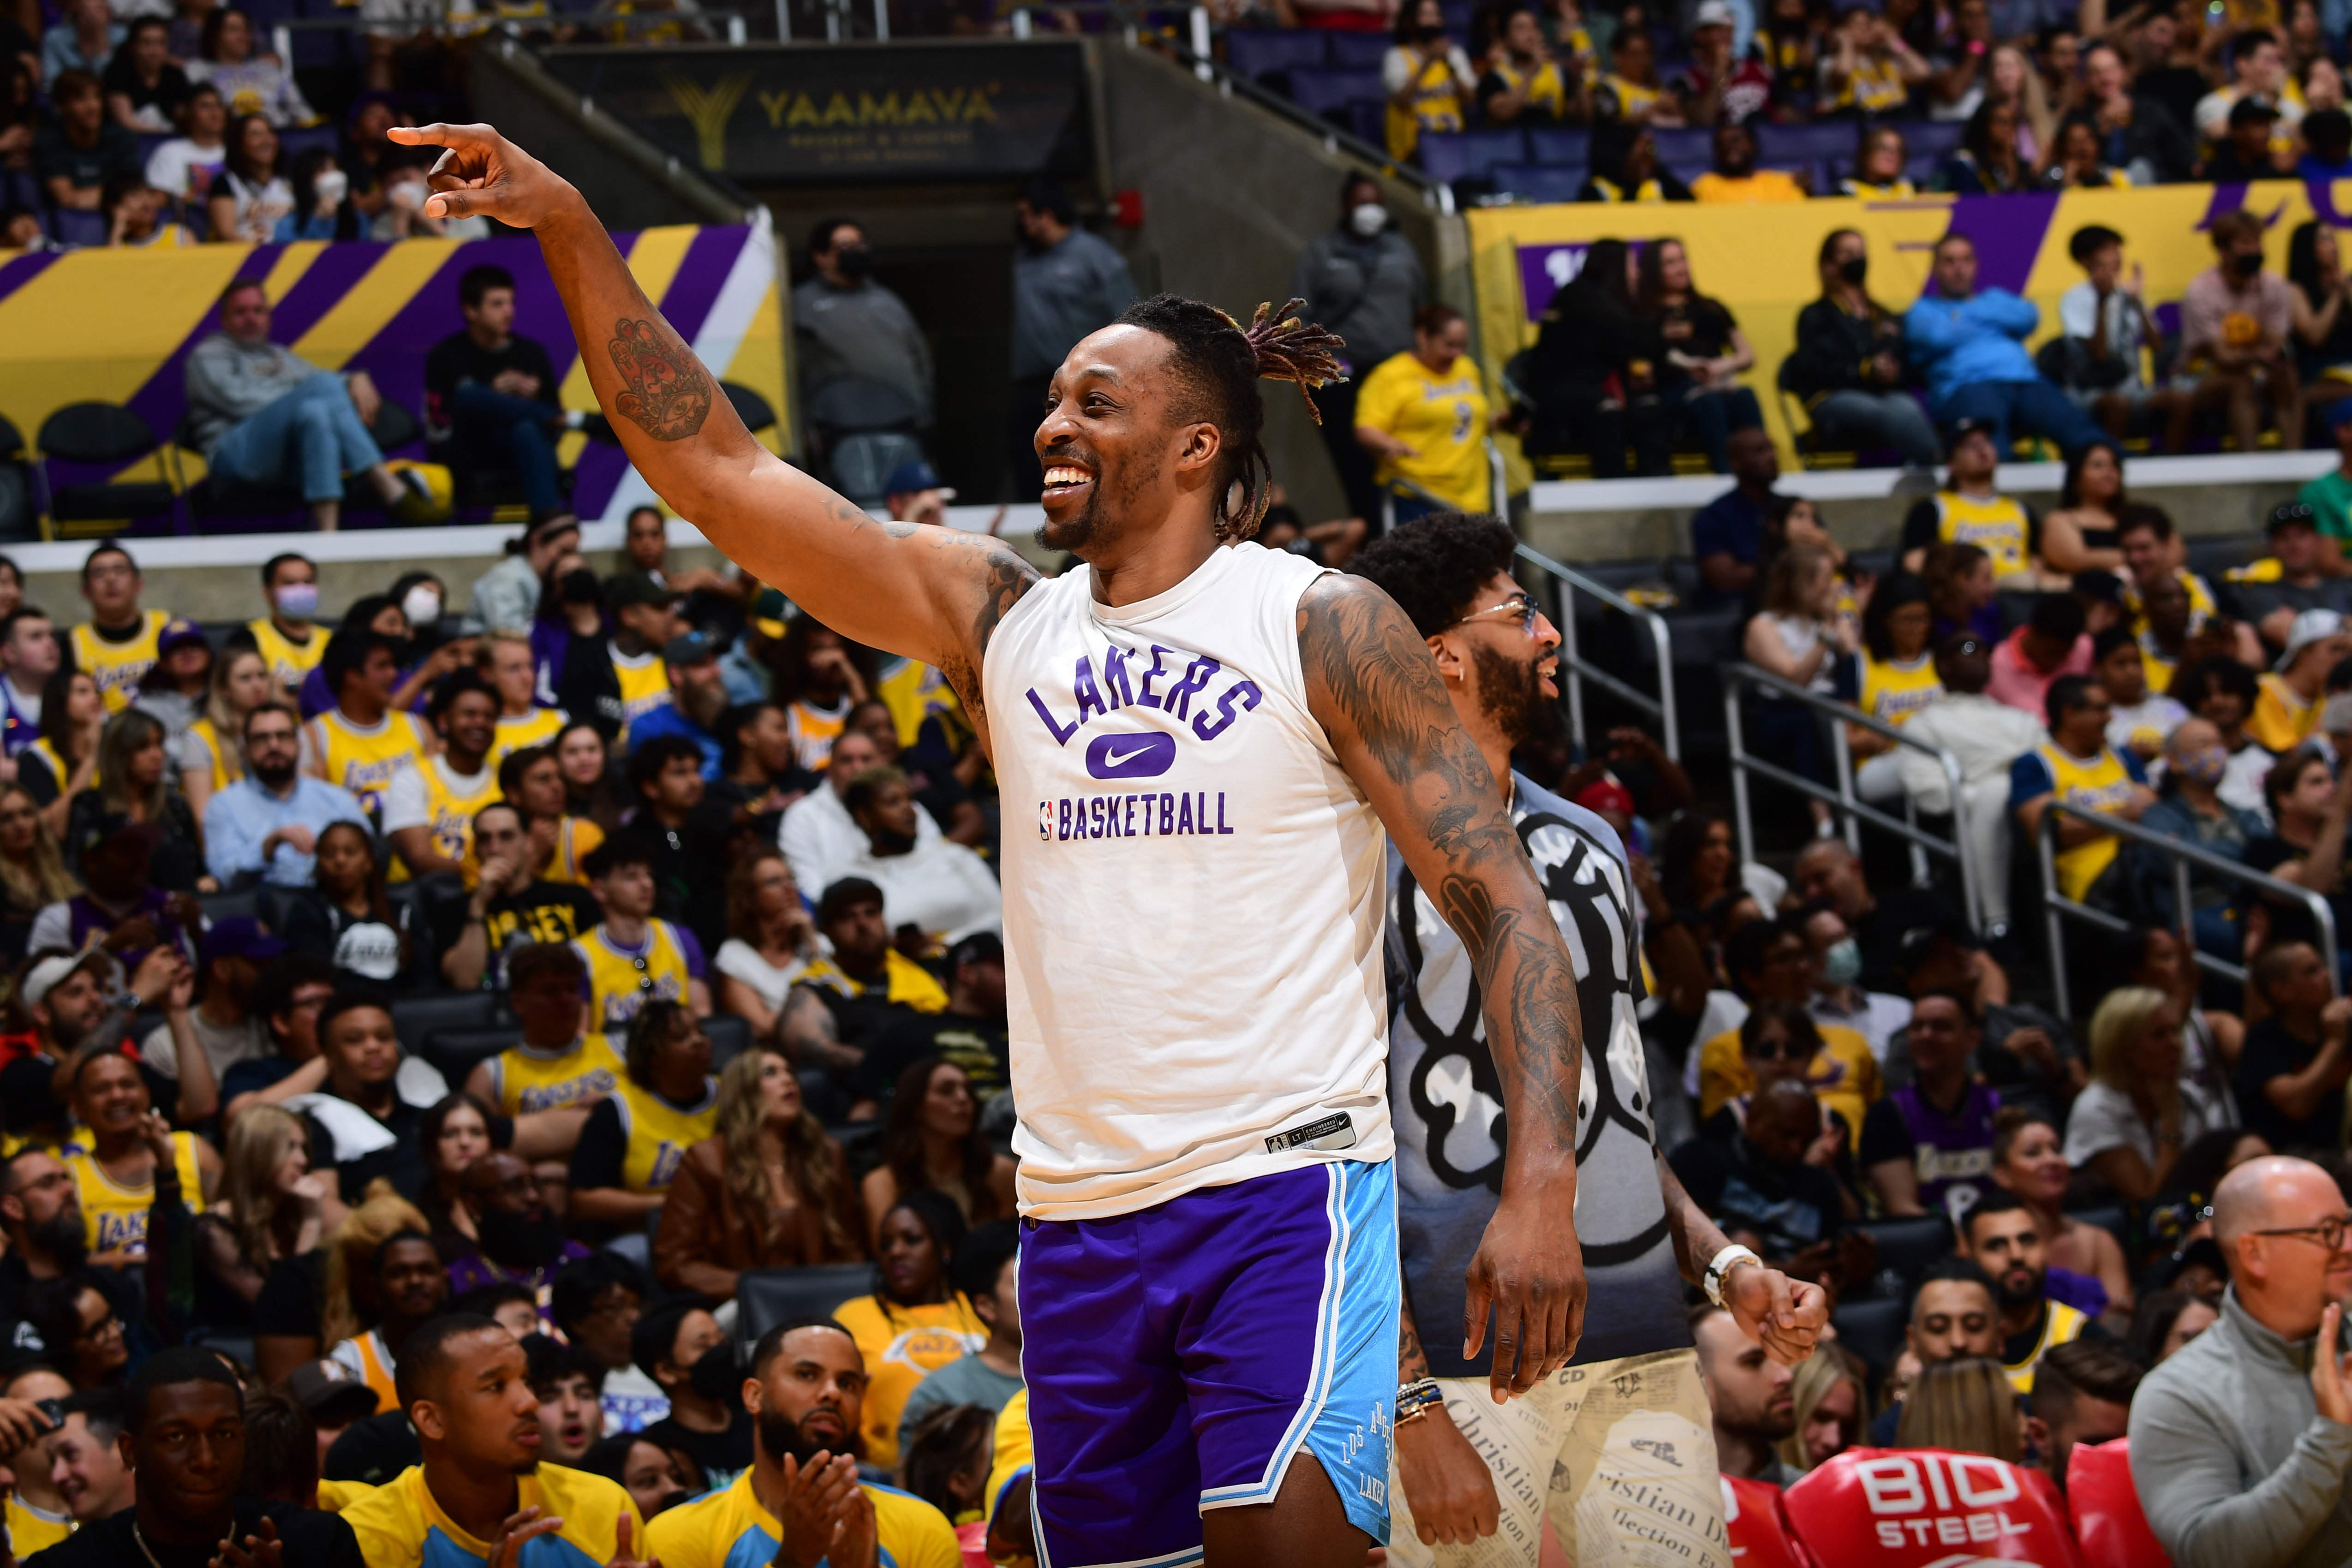 The NBA world agrees -- Dwight Howard is the biggest snub from the